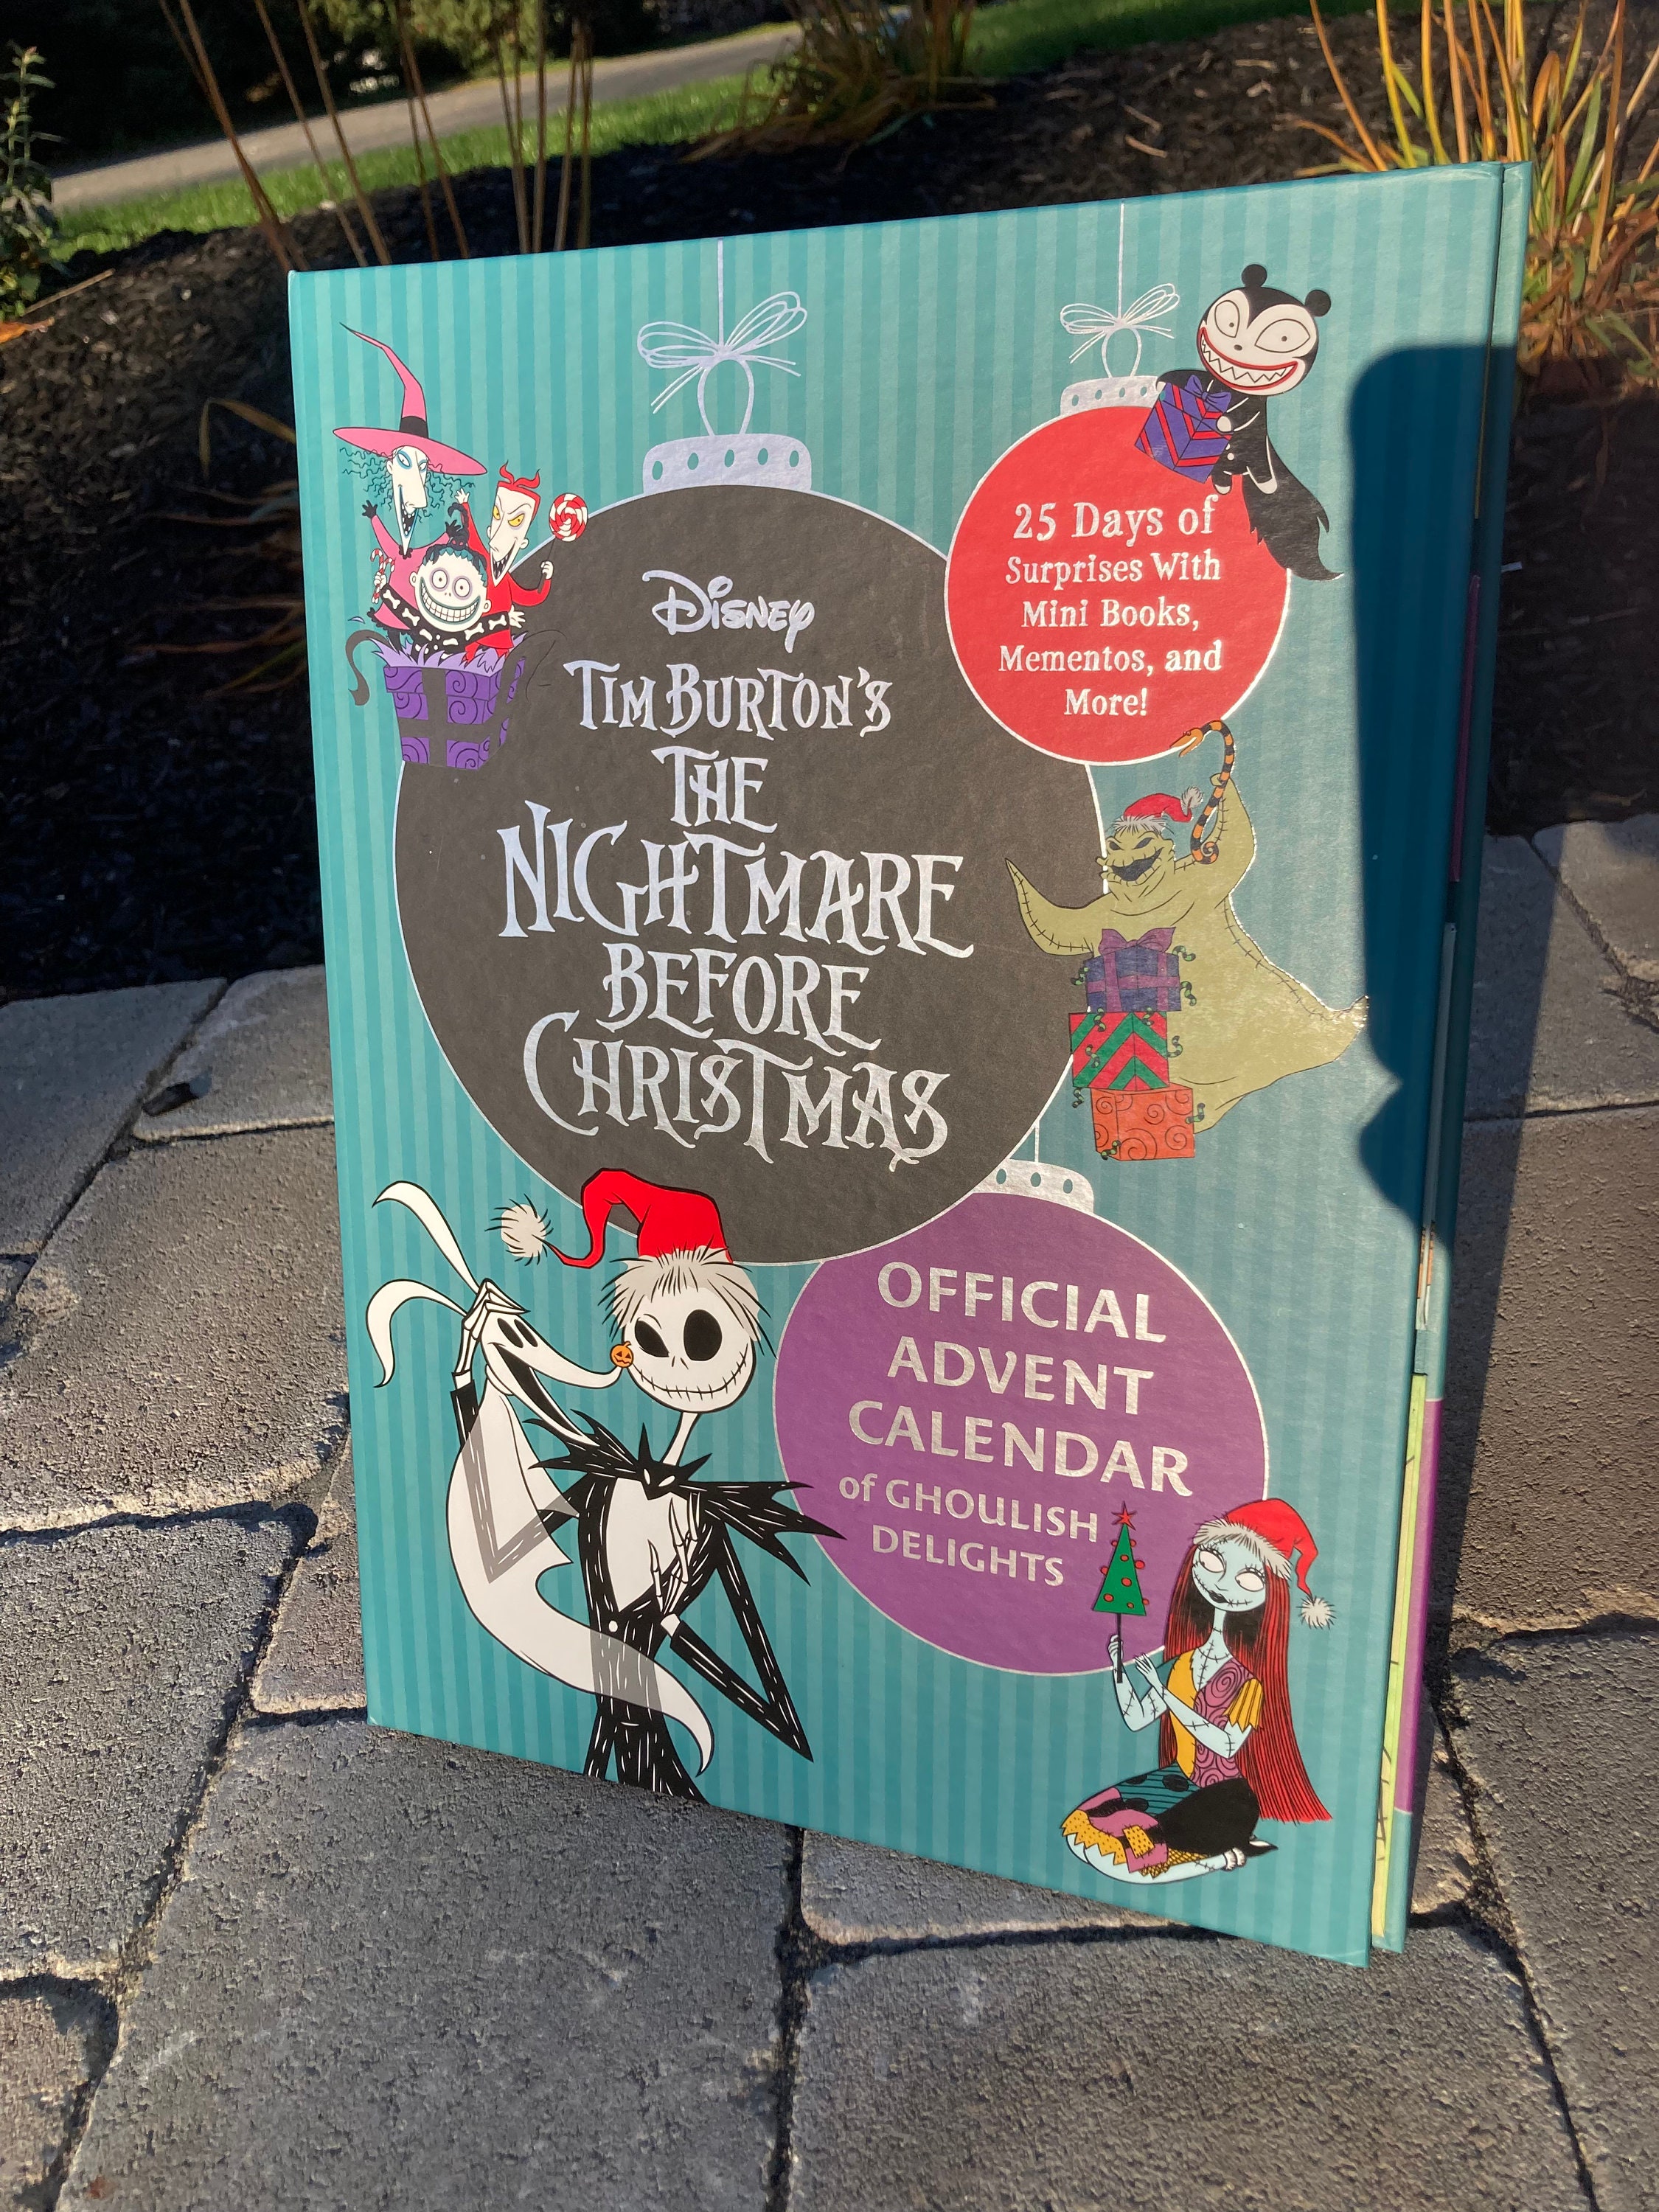 The Nightmare Before Christmas: Official Advent Calendar: Ghoulish